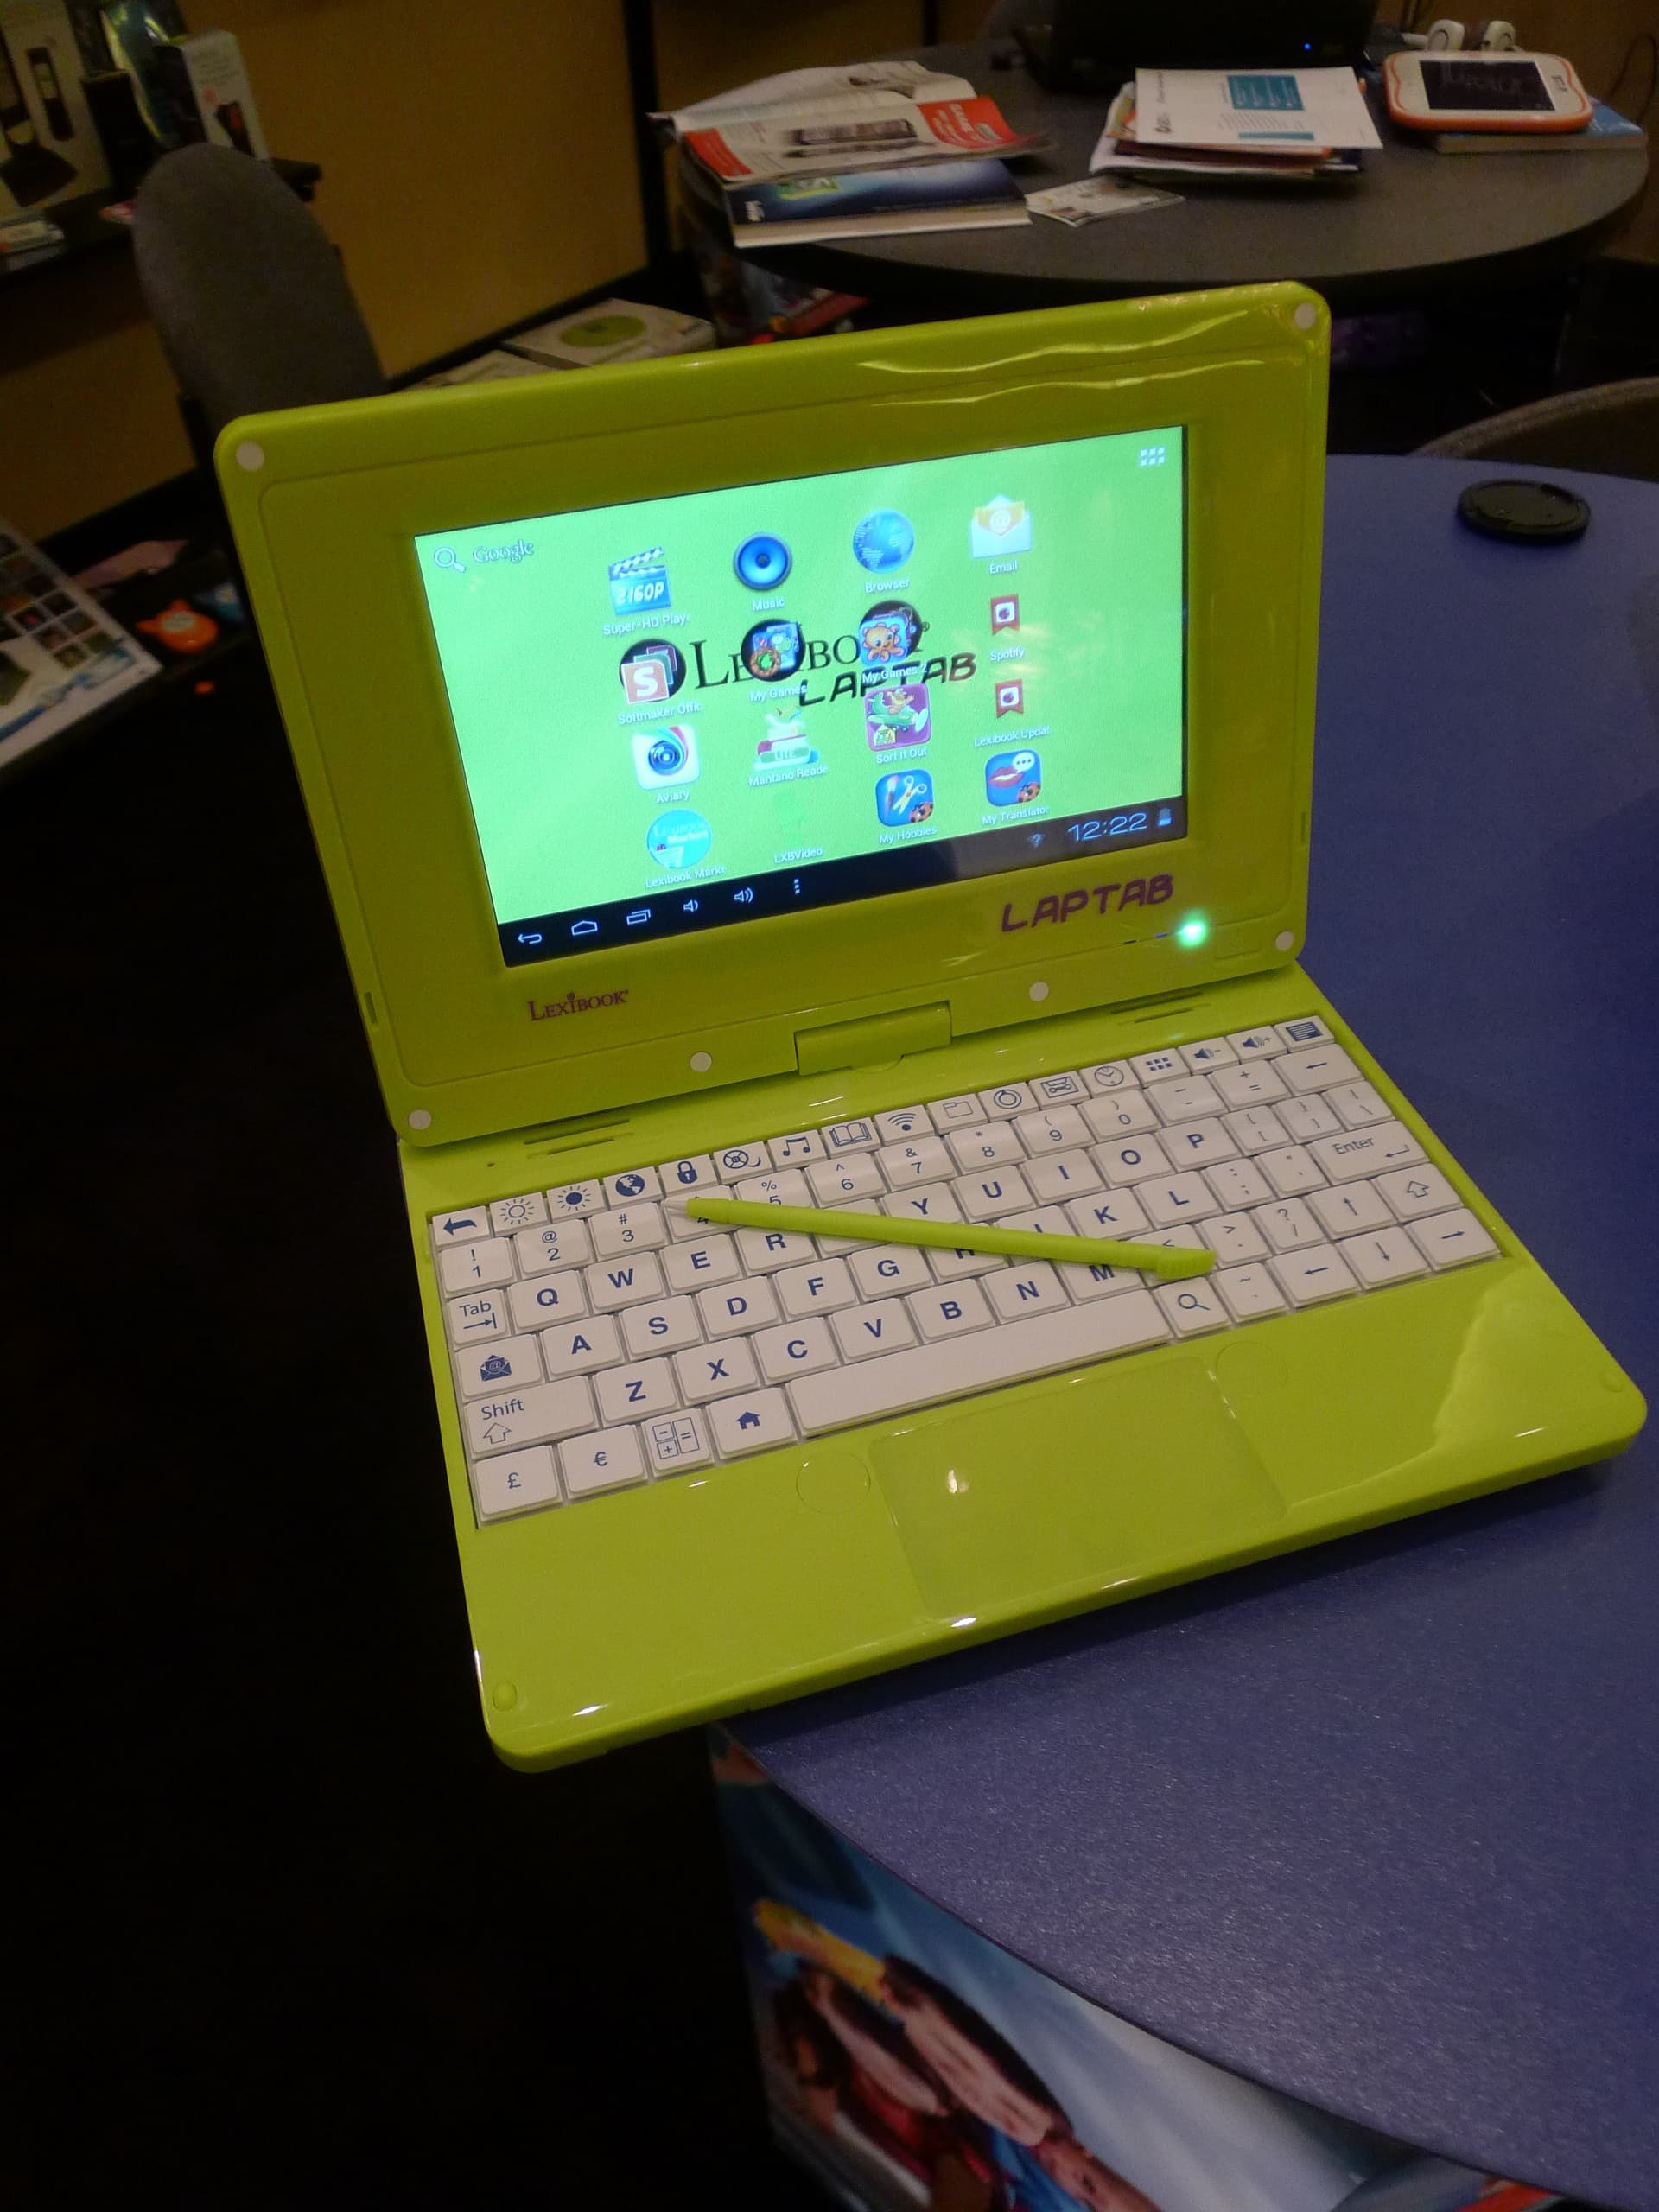 Lexibook Laptab is an Android tablet, notebook, kids computer - Liliputing